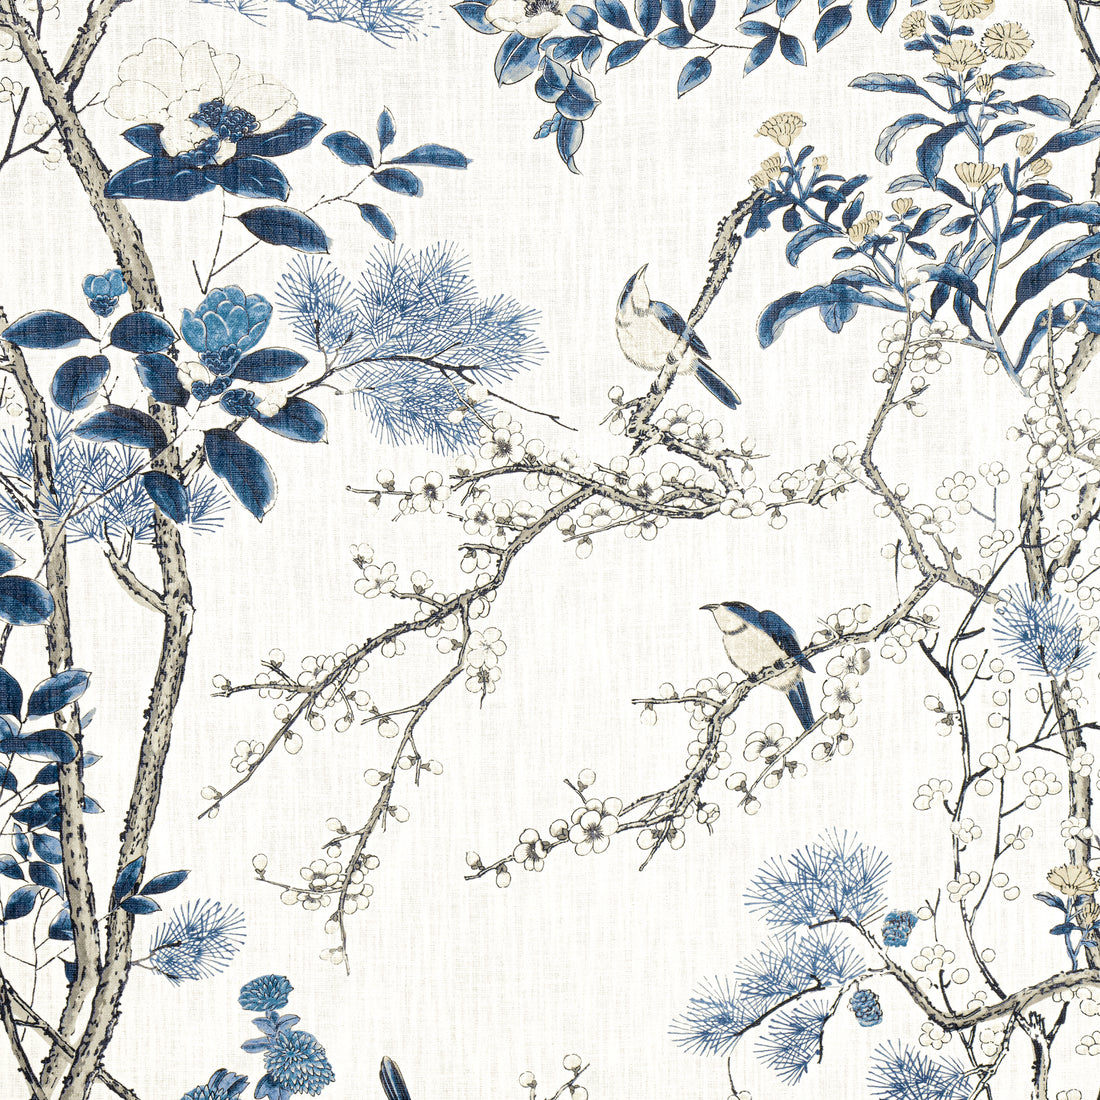 Katsura fabric in blue and white - pattern number F913619 - by Thibaut in the Grand Palace collection